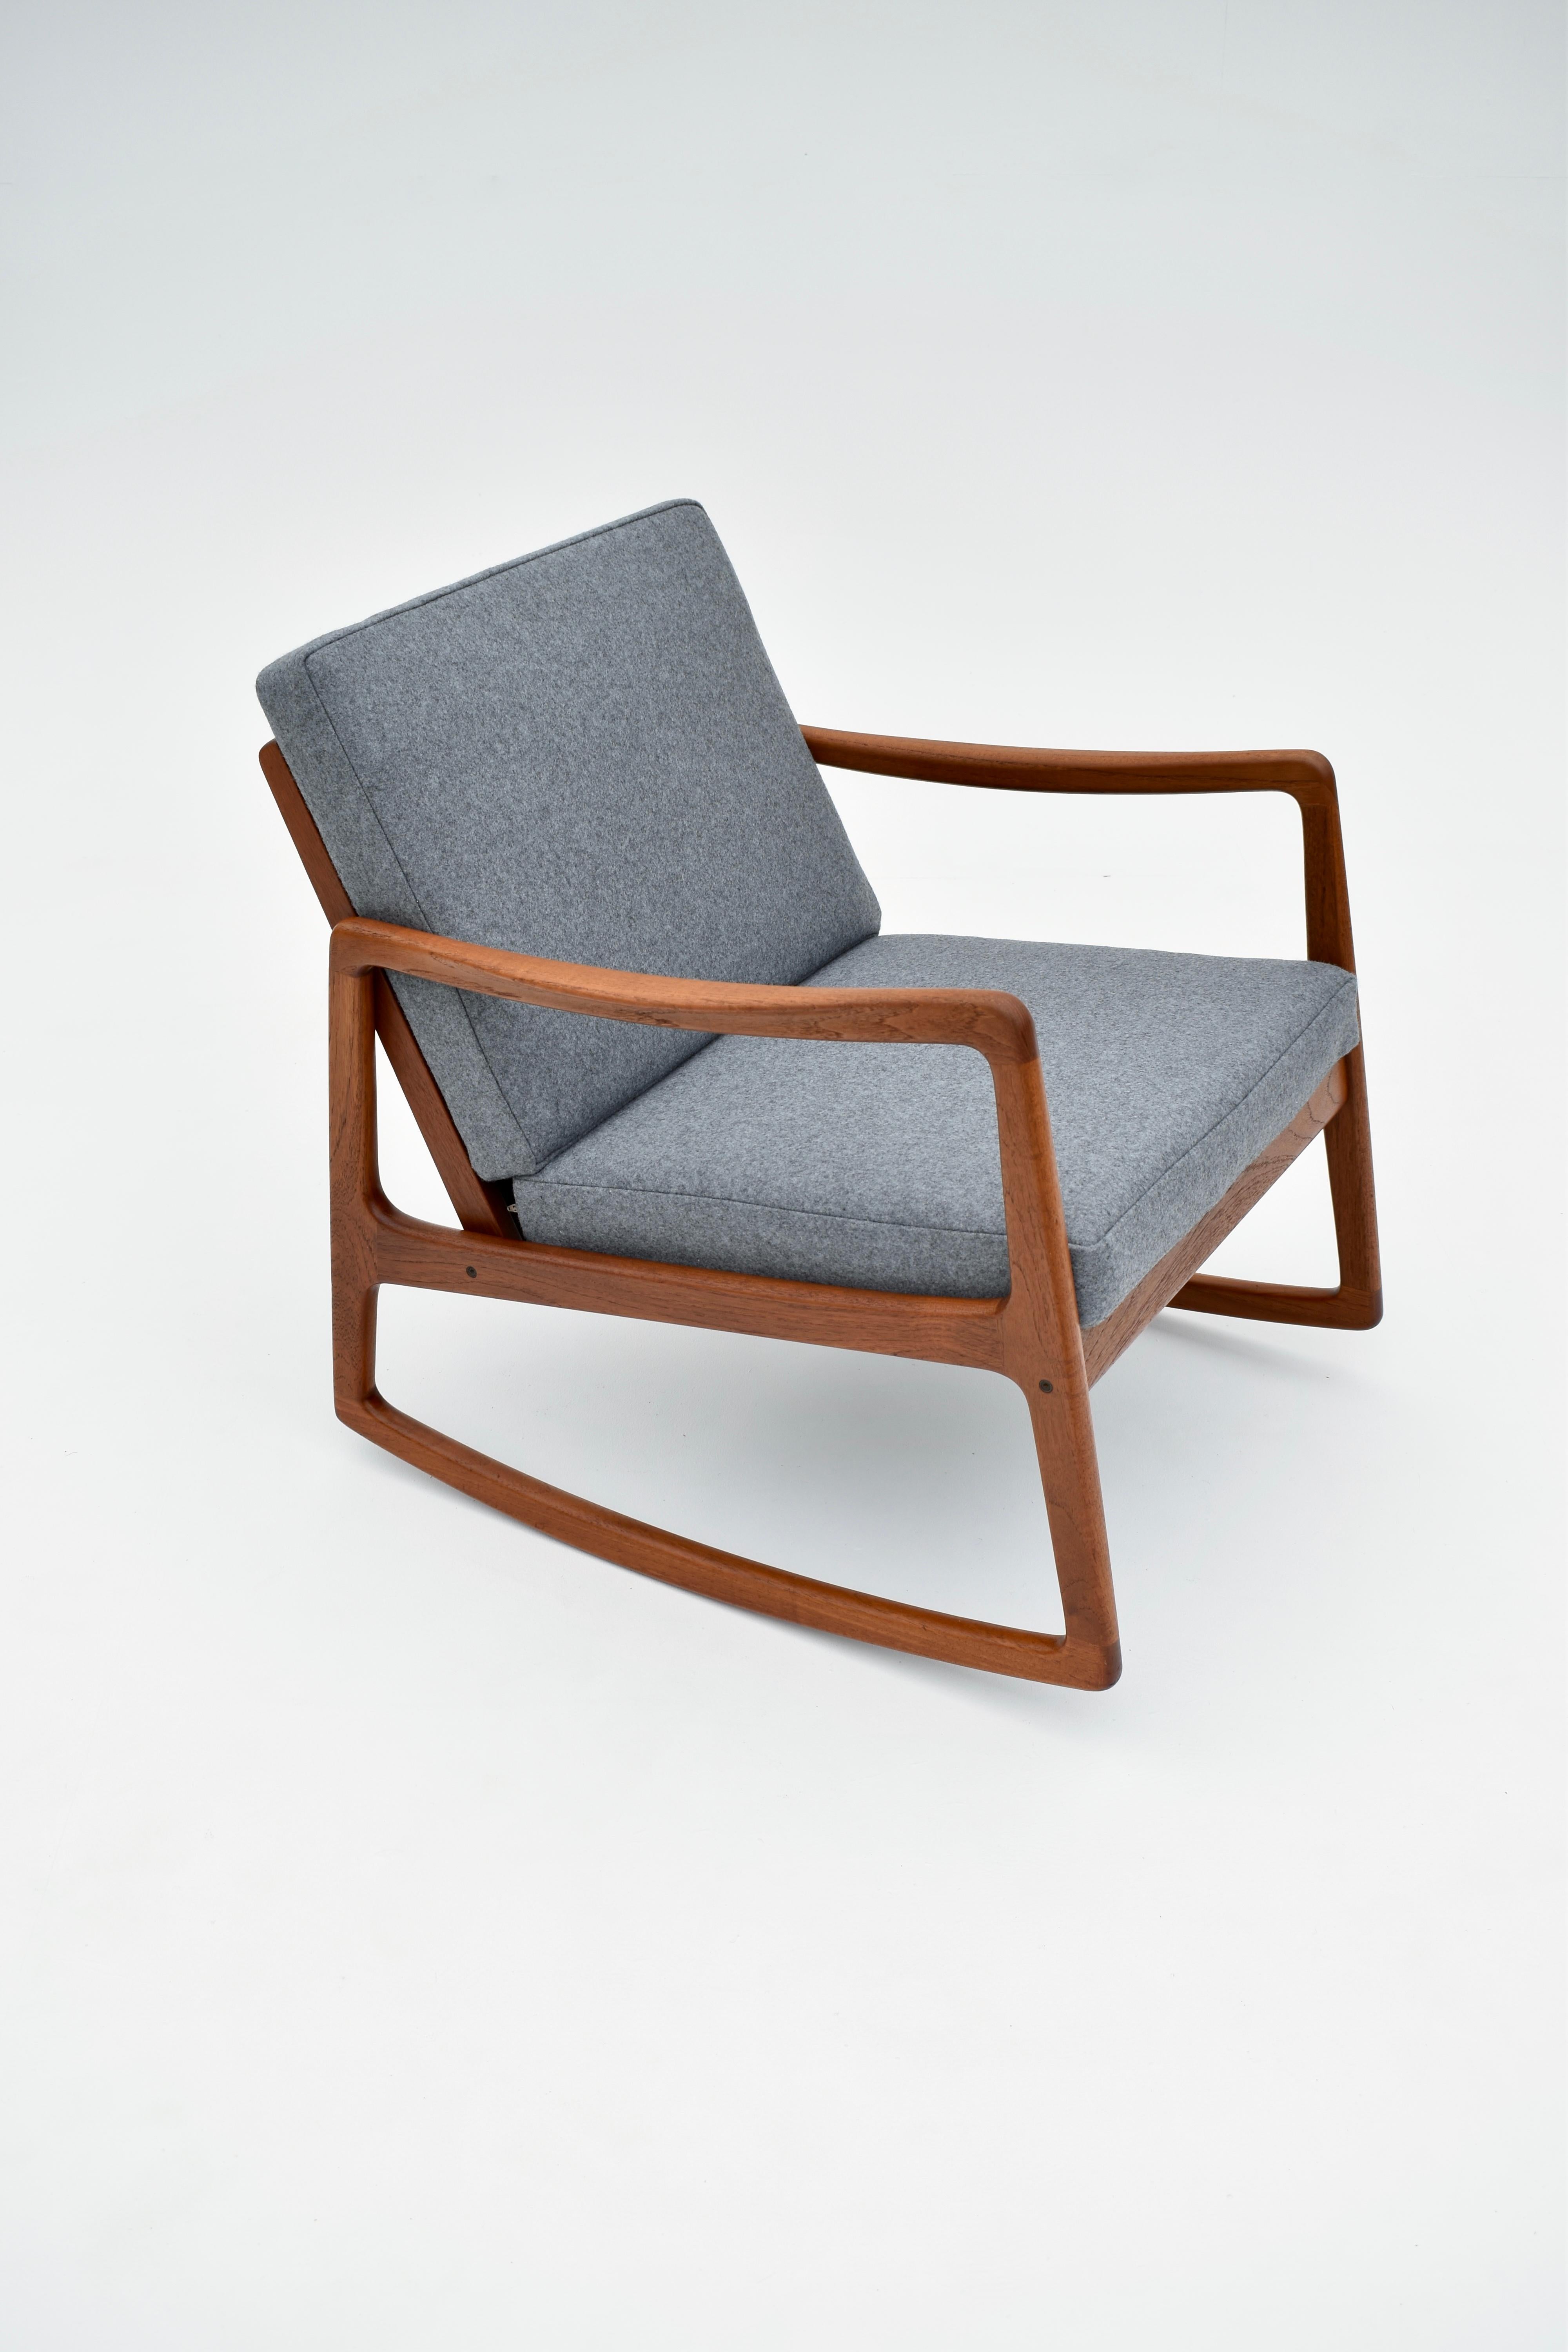 A superb and hard to find teak rocking chair designed by Ole Wanscher for France & Son, Denmark.

An absolute triumph of a design, the slenderness of the frame is remarkable there is not a line out of place, this has always been one of our